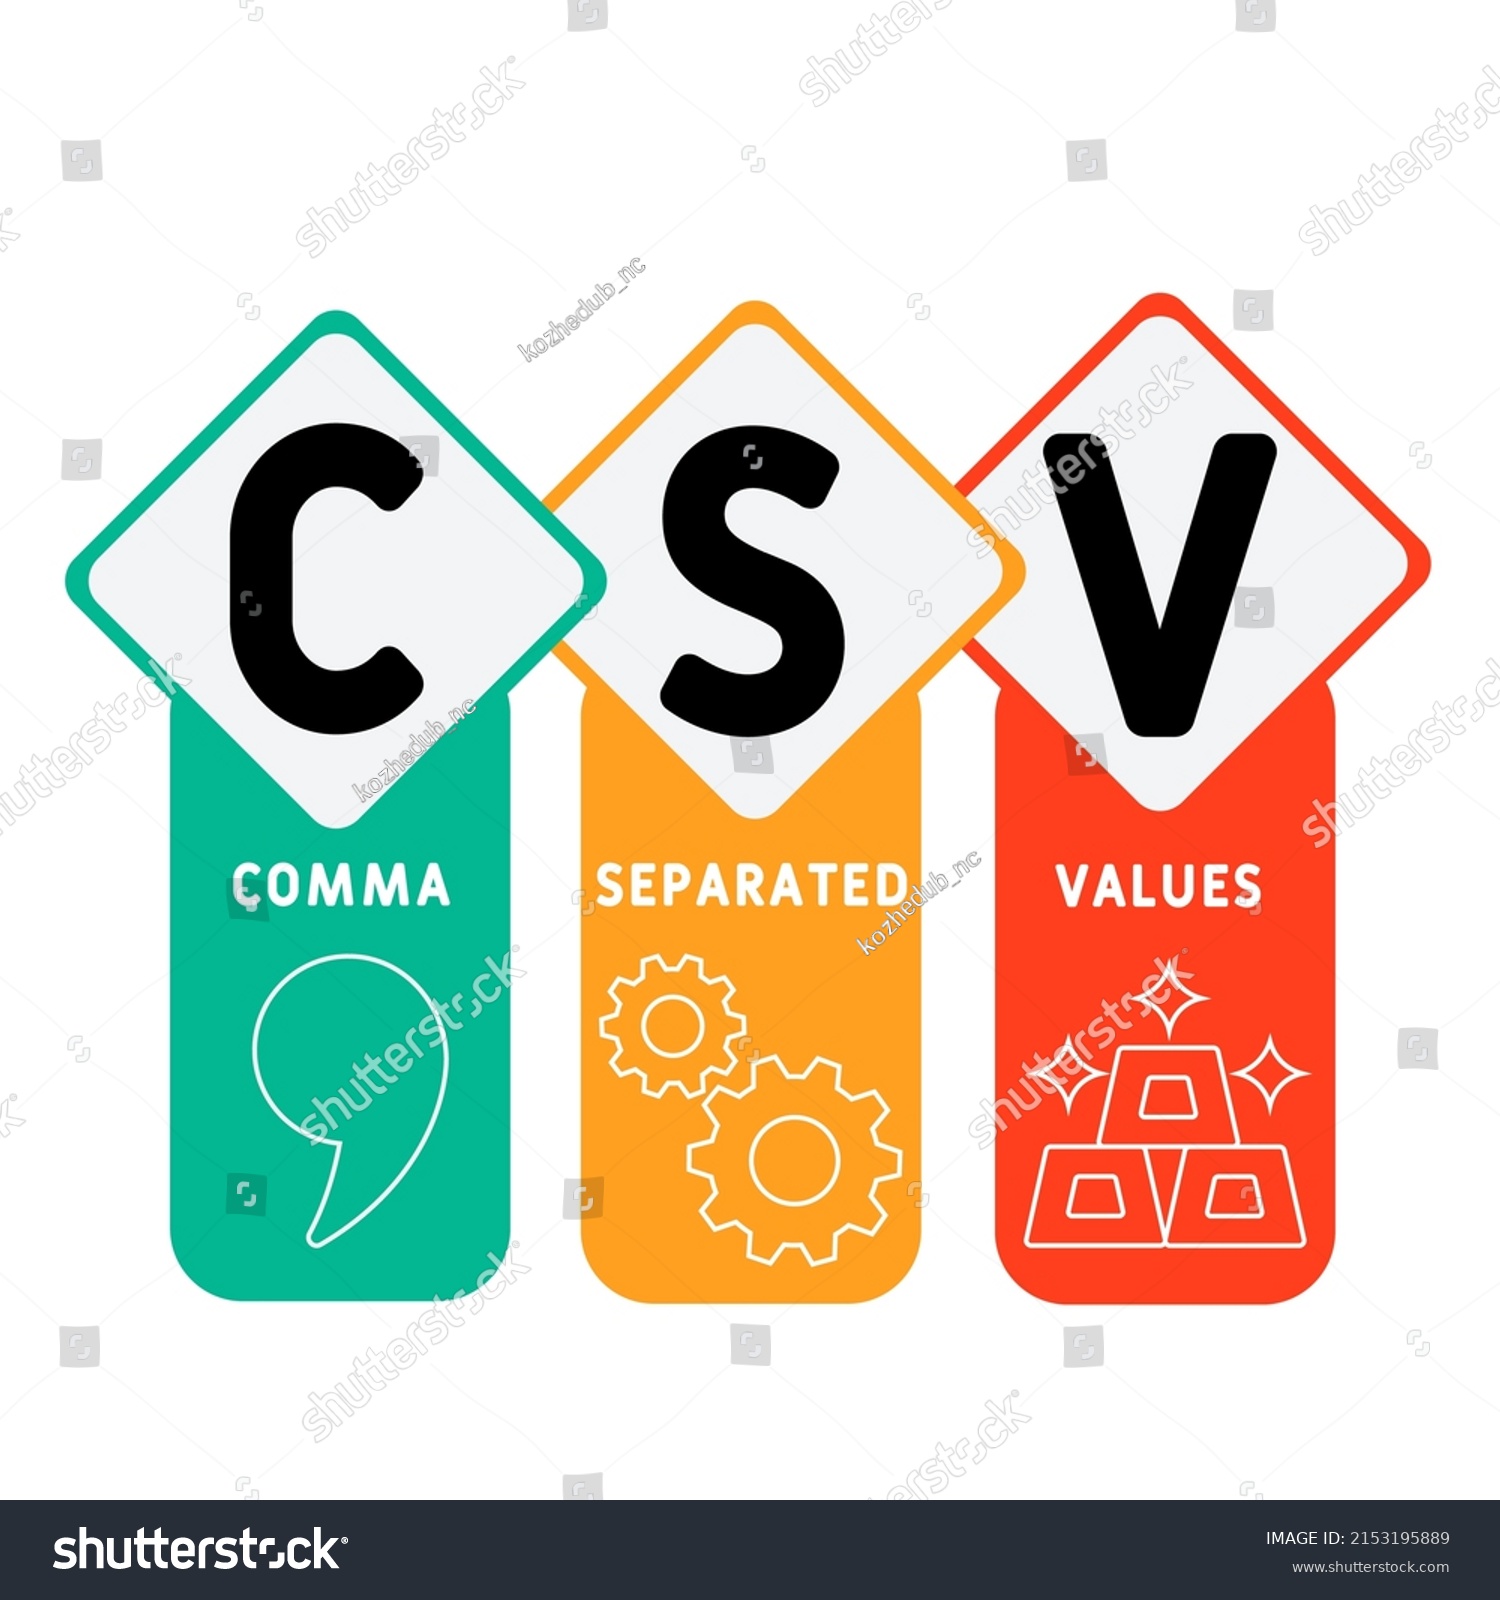 Csv Comma Separated Values Acronym Business Stock Vector Royalty Free 2153195889 Shutterstock 3094